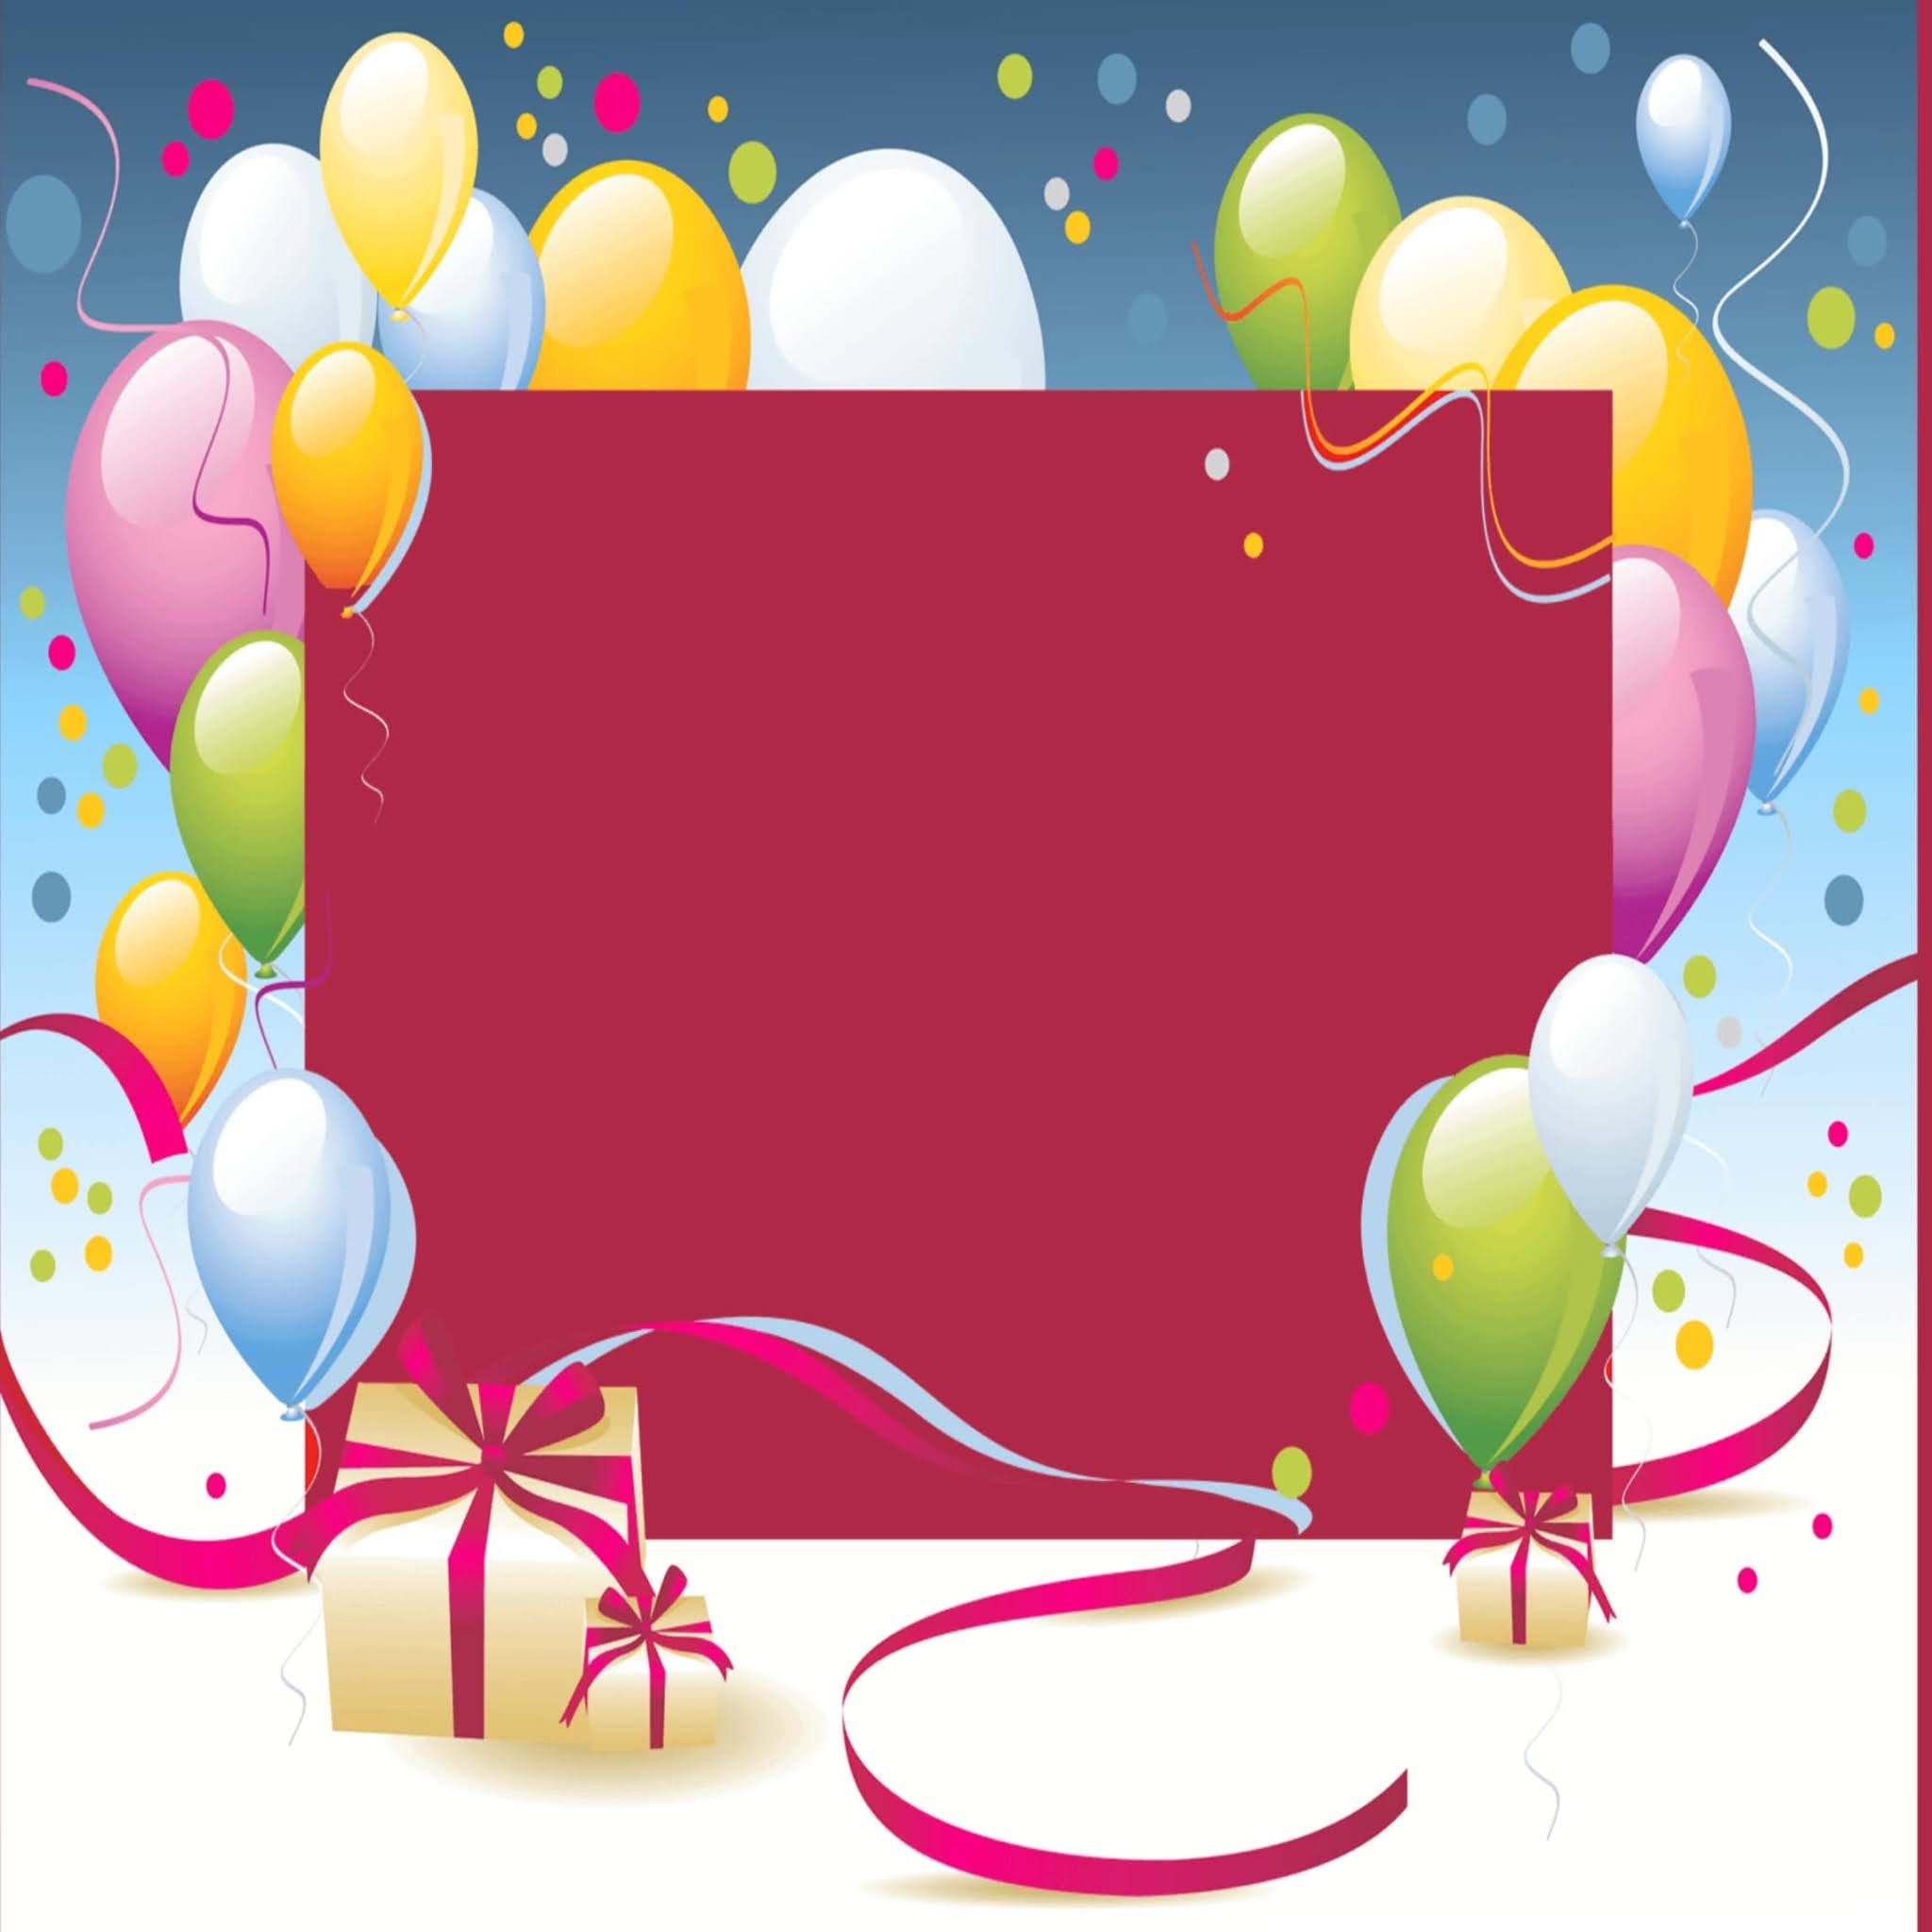 Happy birthday background Images |Background images for Birthday